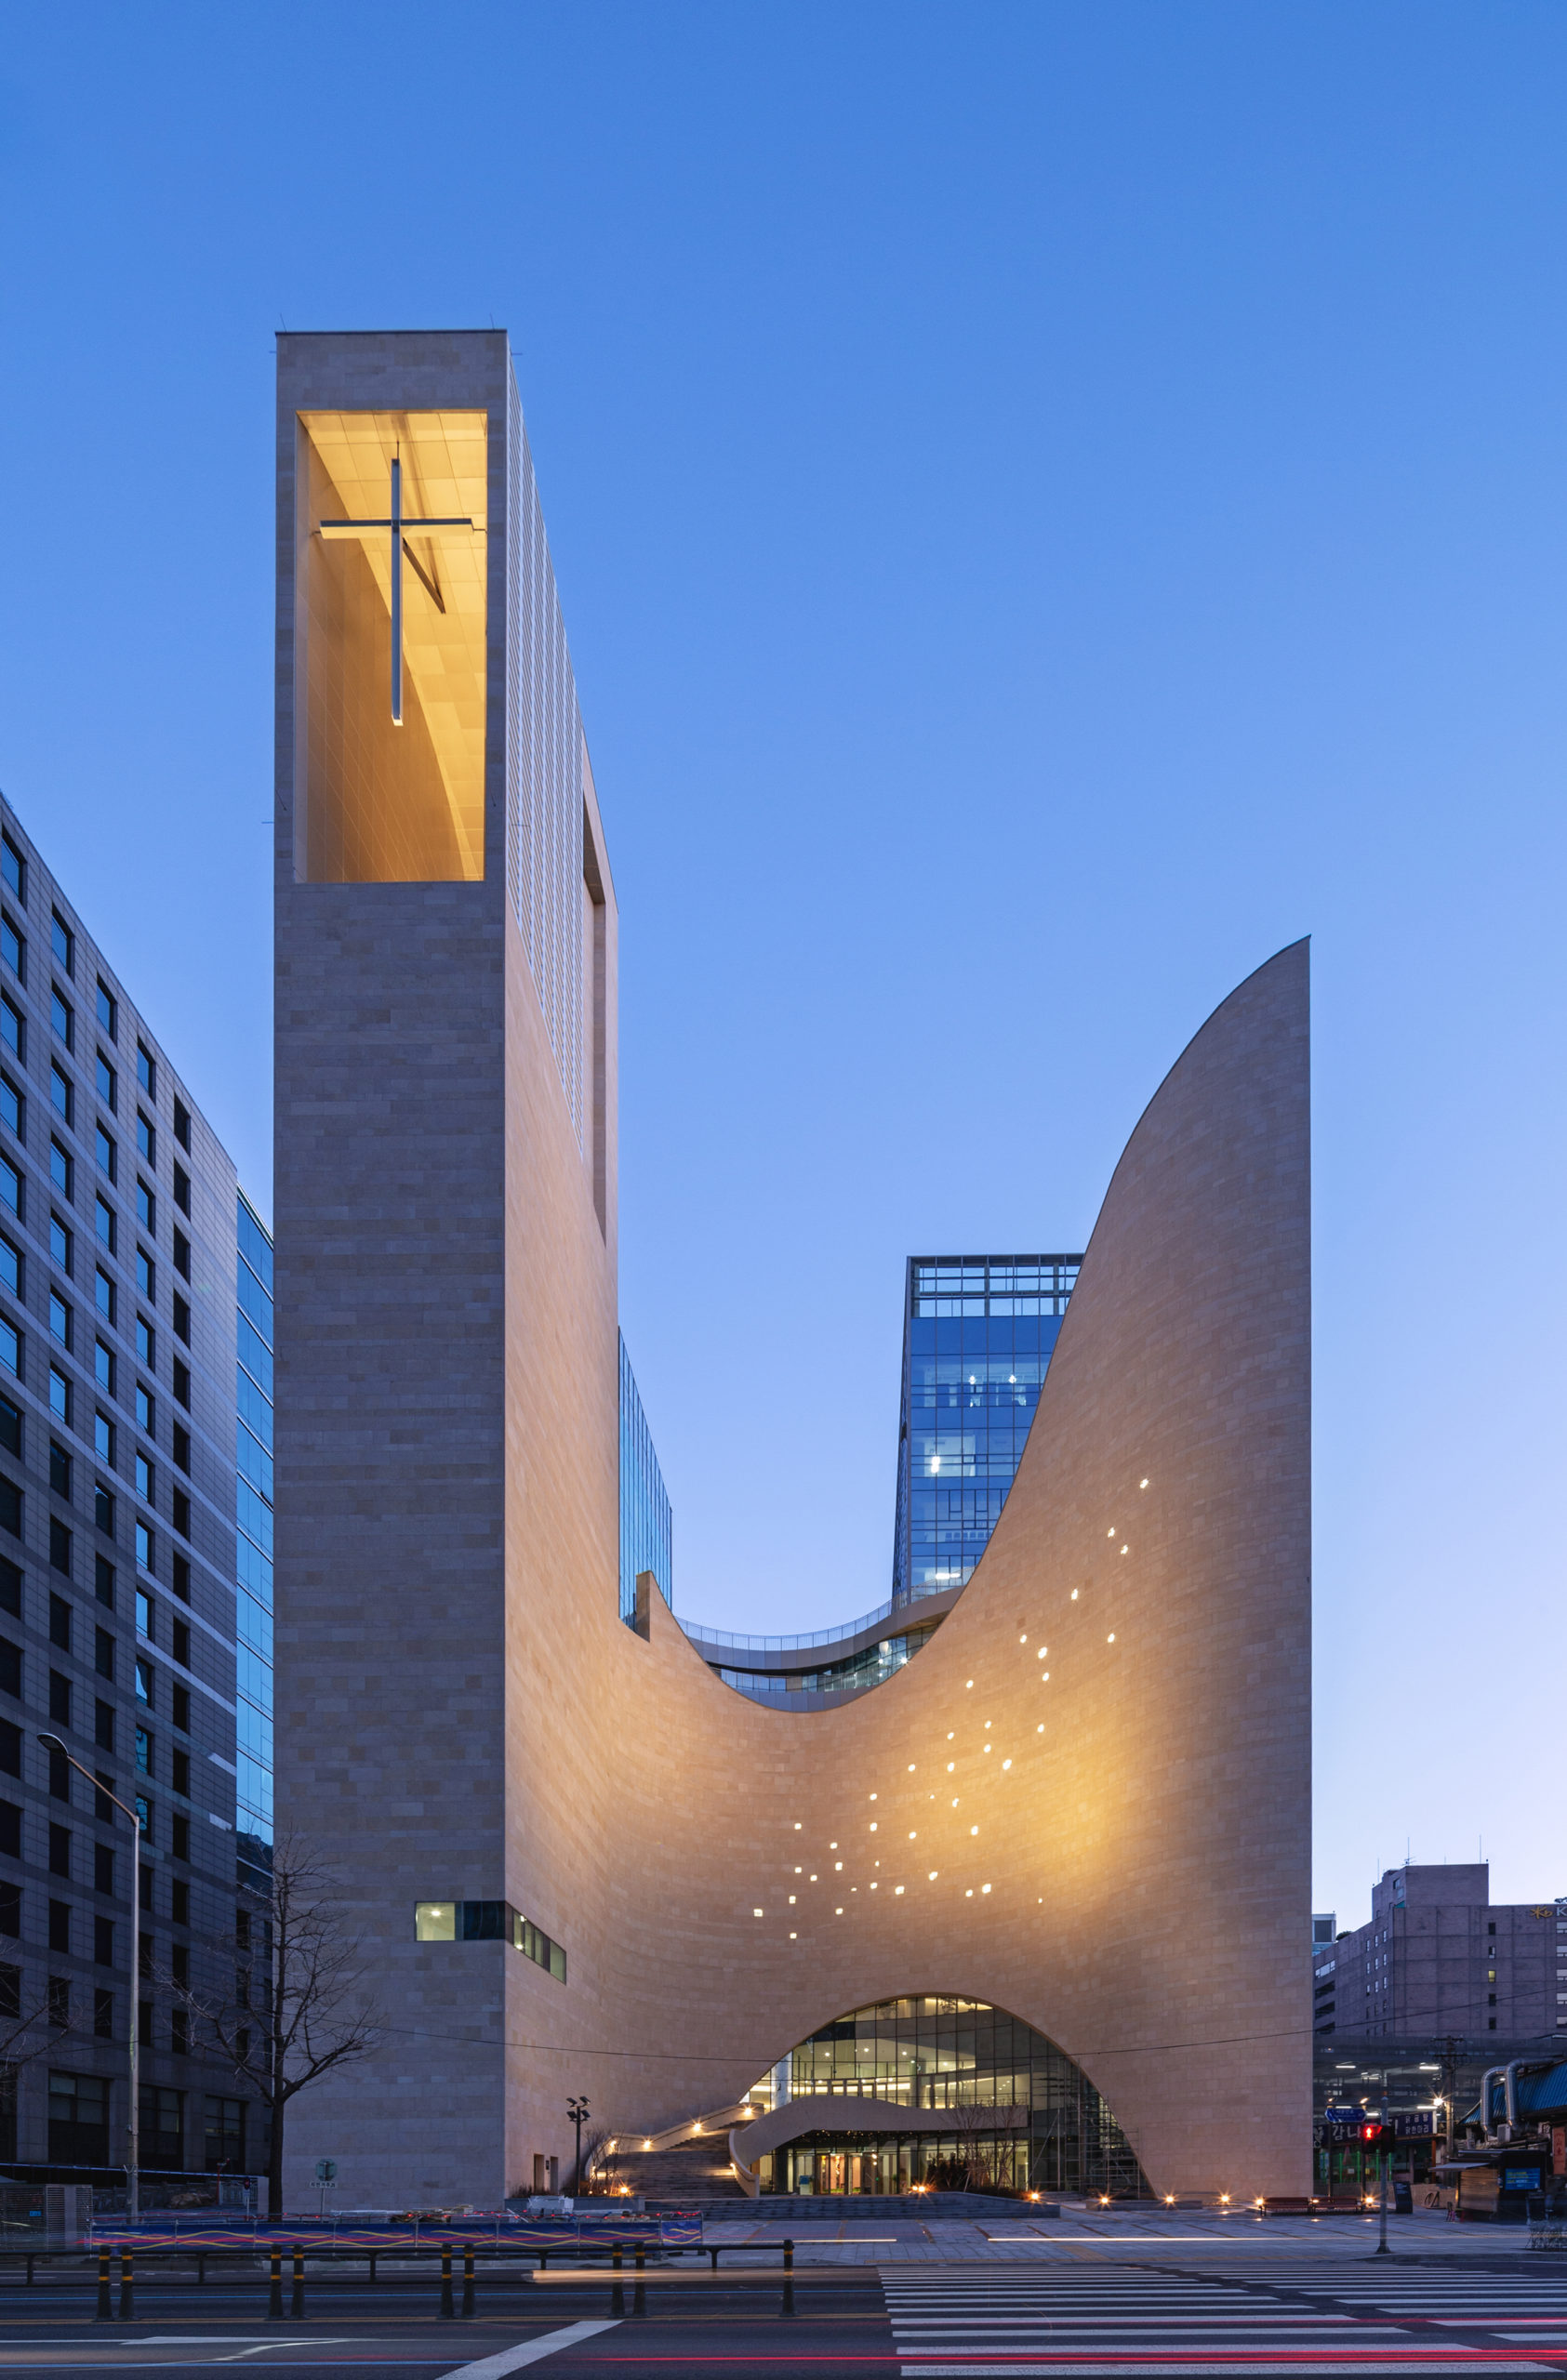 This concave roofline is a symbolic reach towards the heavens and gesture of open-armed embrace